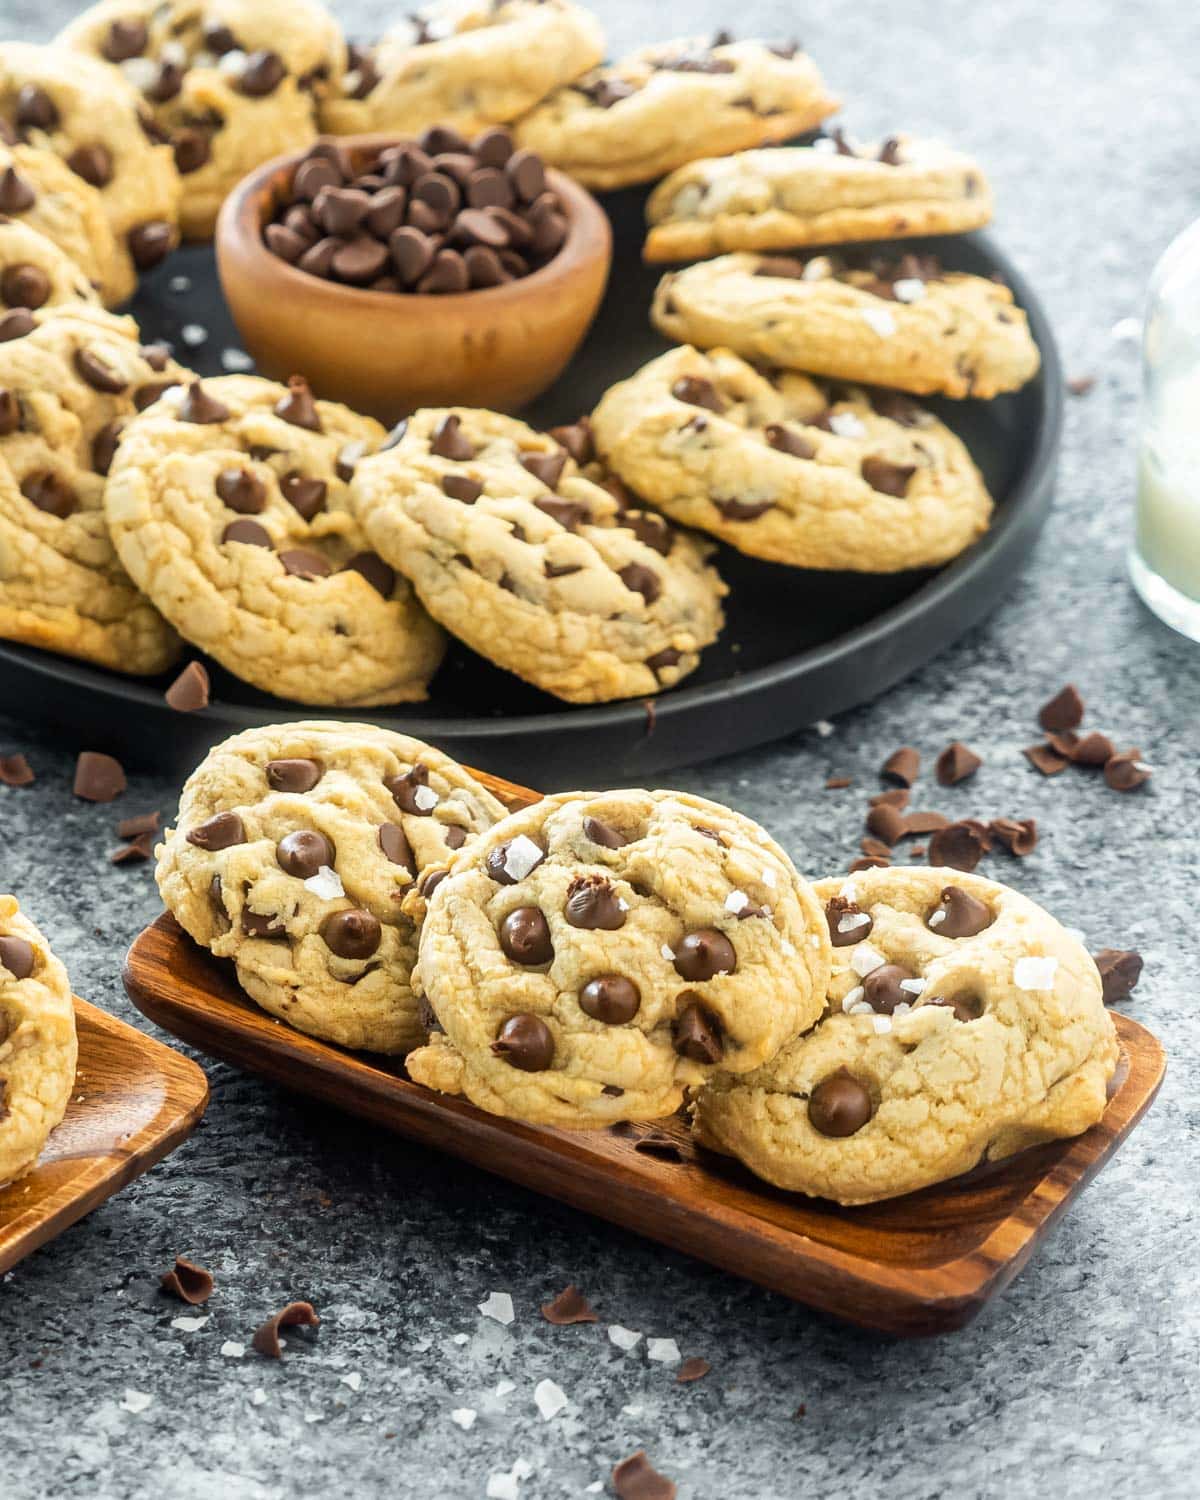 chocolate chip cookies on a wooden plate with a black plate filled with cookies in the back.